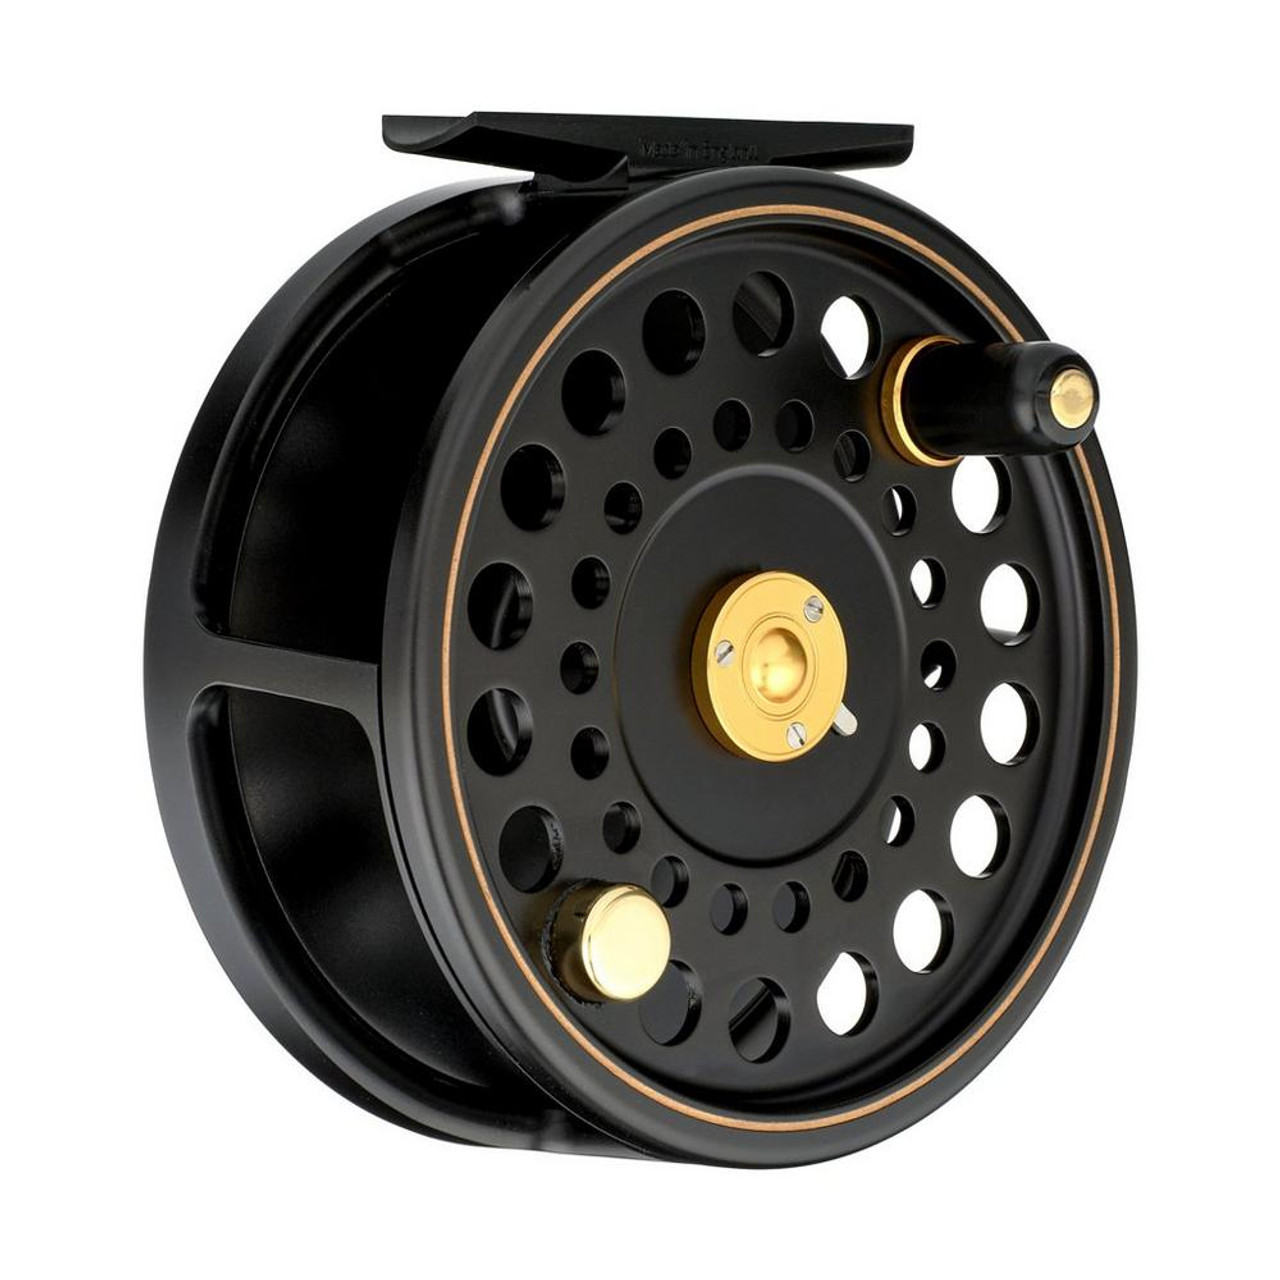 HARDY GOLDEN “THE FEATHERWEIGHT” 2 7/8″ DRY FLY REEL – Vintage